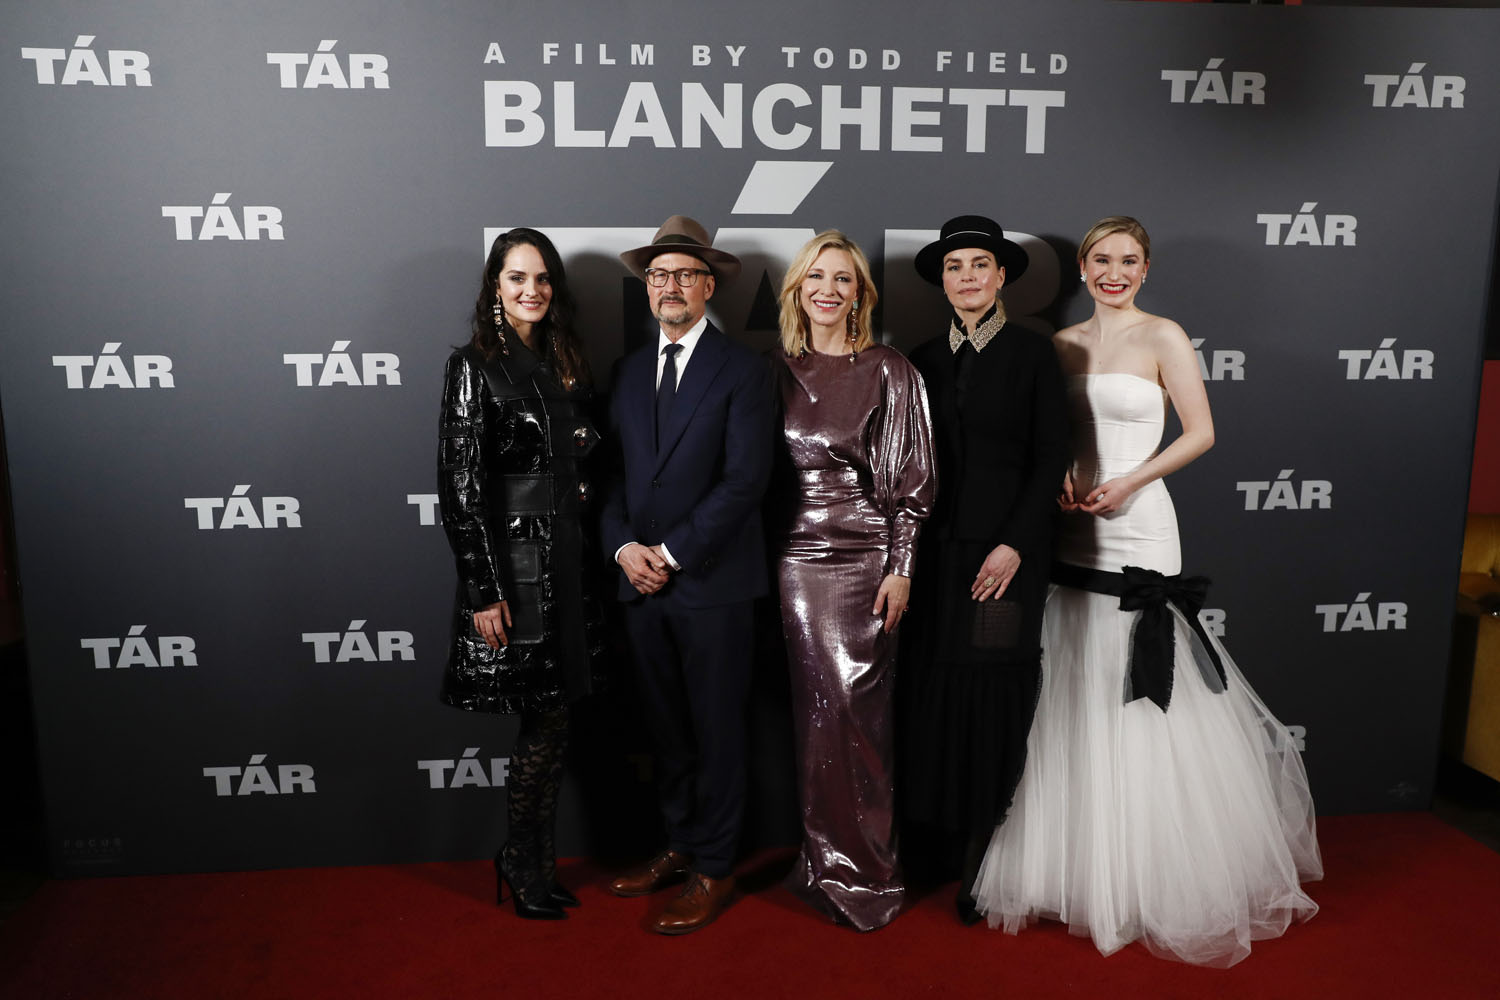 Noemie Merlant attends the Premiere of 'TAR' at Picturehouse